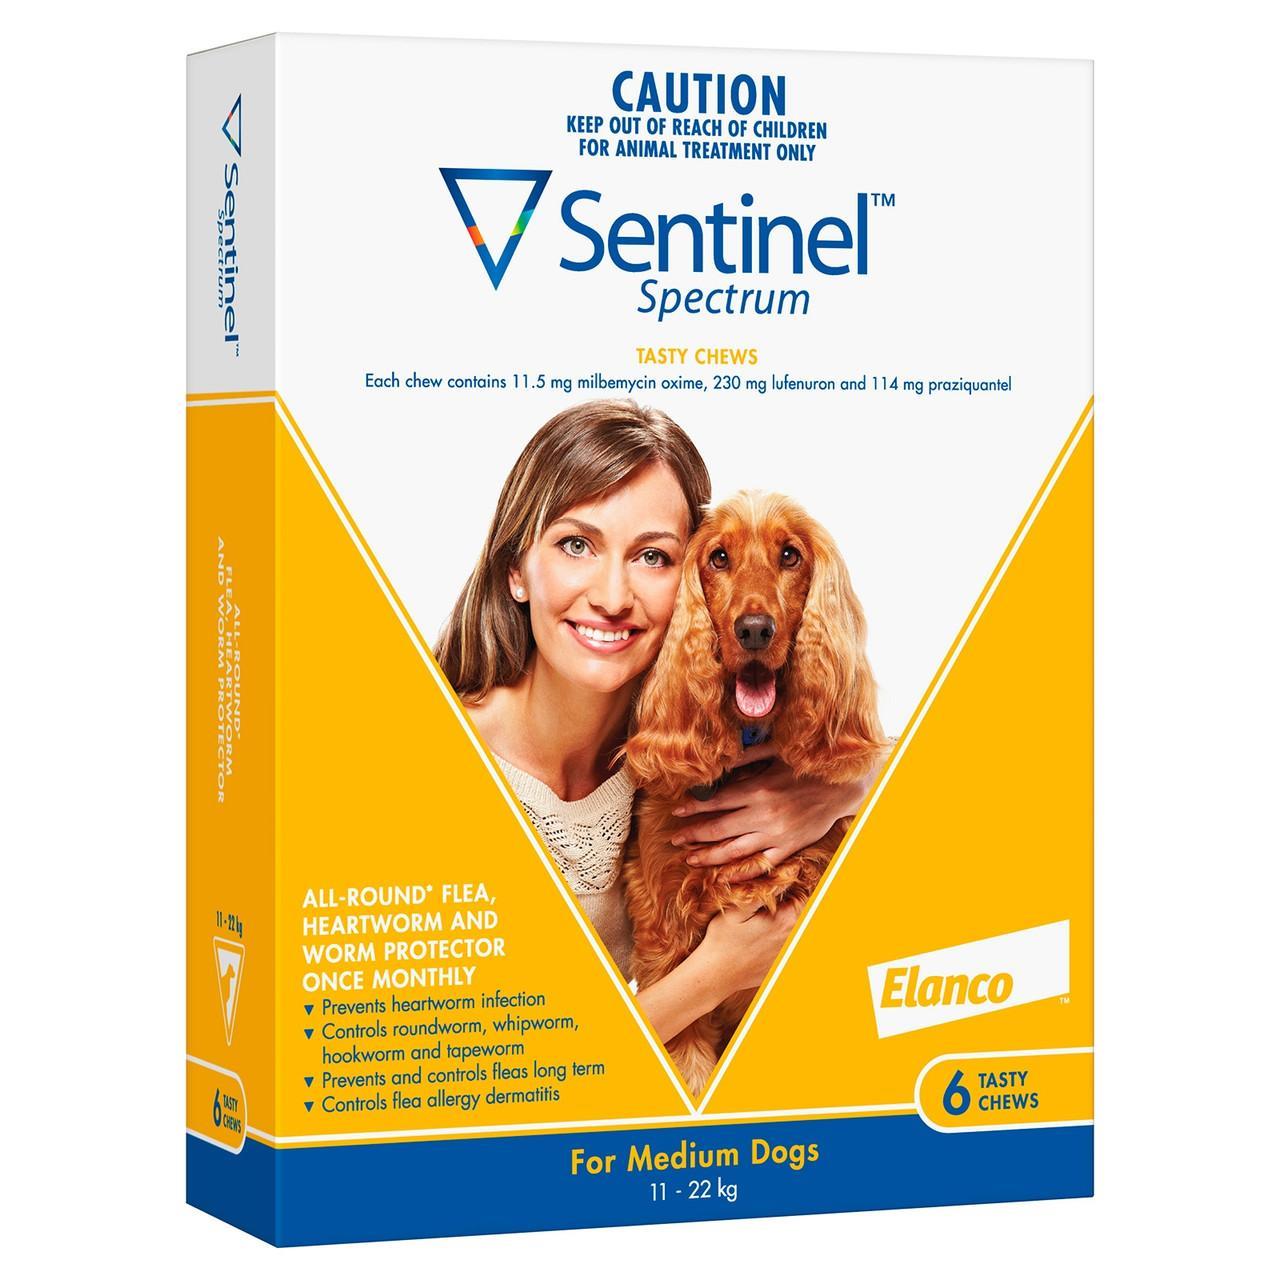 Sentinel Spectrum Fleas, Heartworm & Worms for Dogs 11 - 22kg - 6 Pack